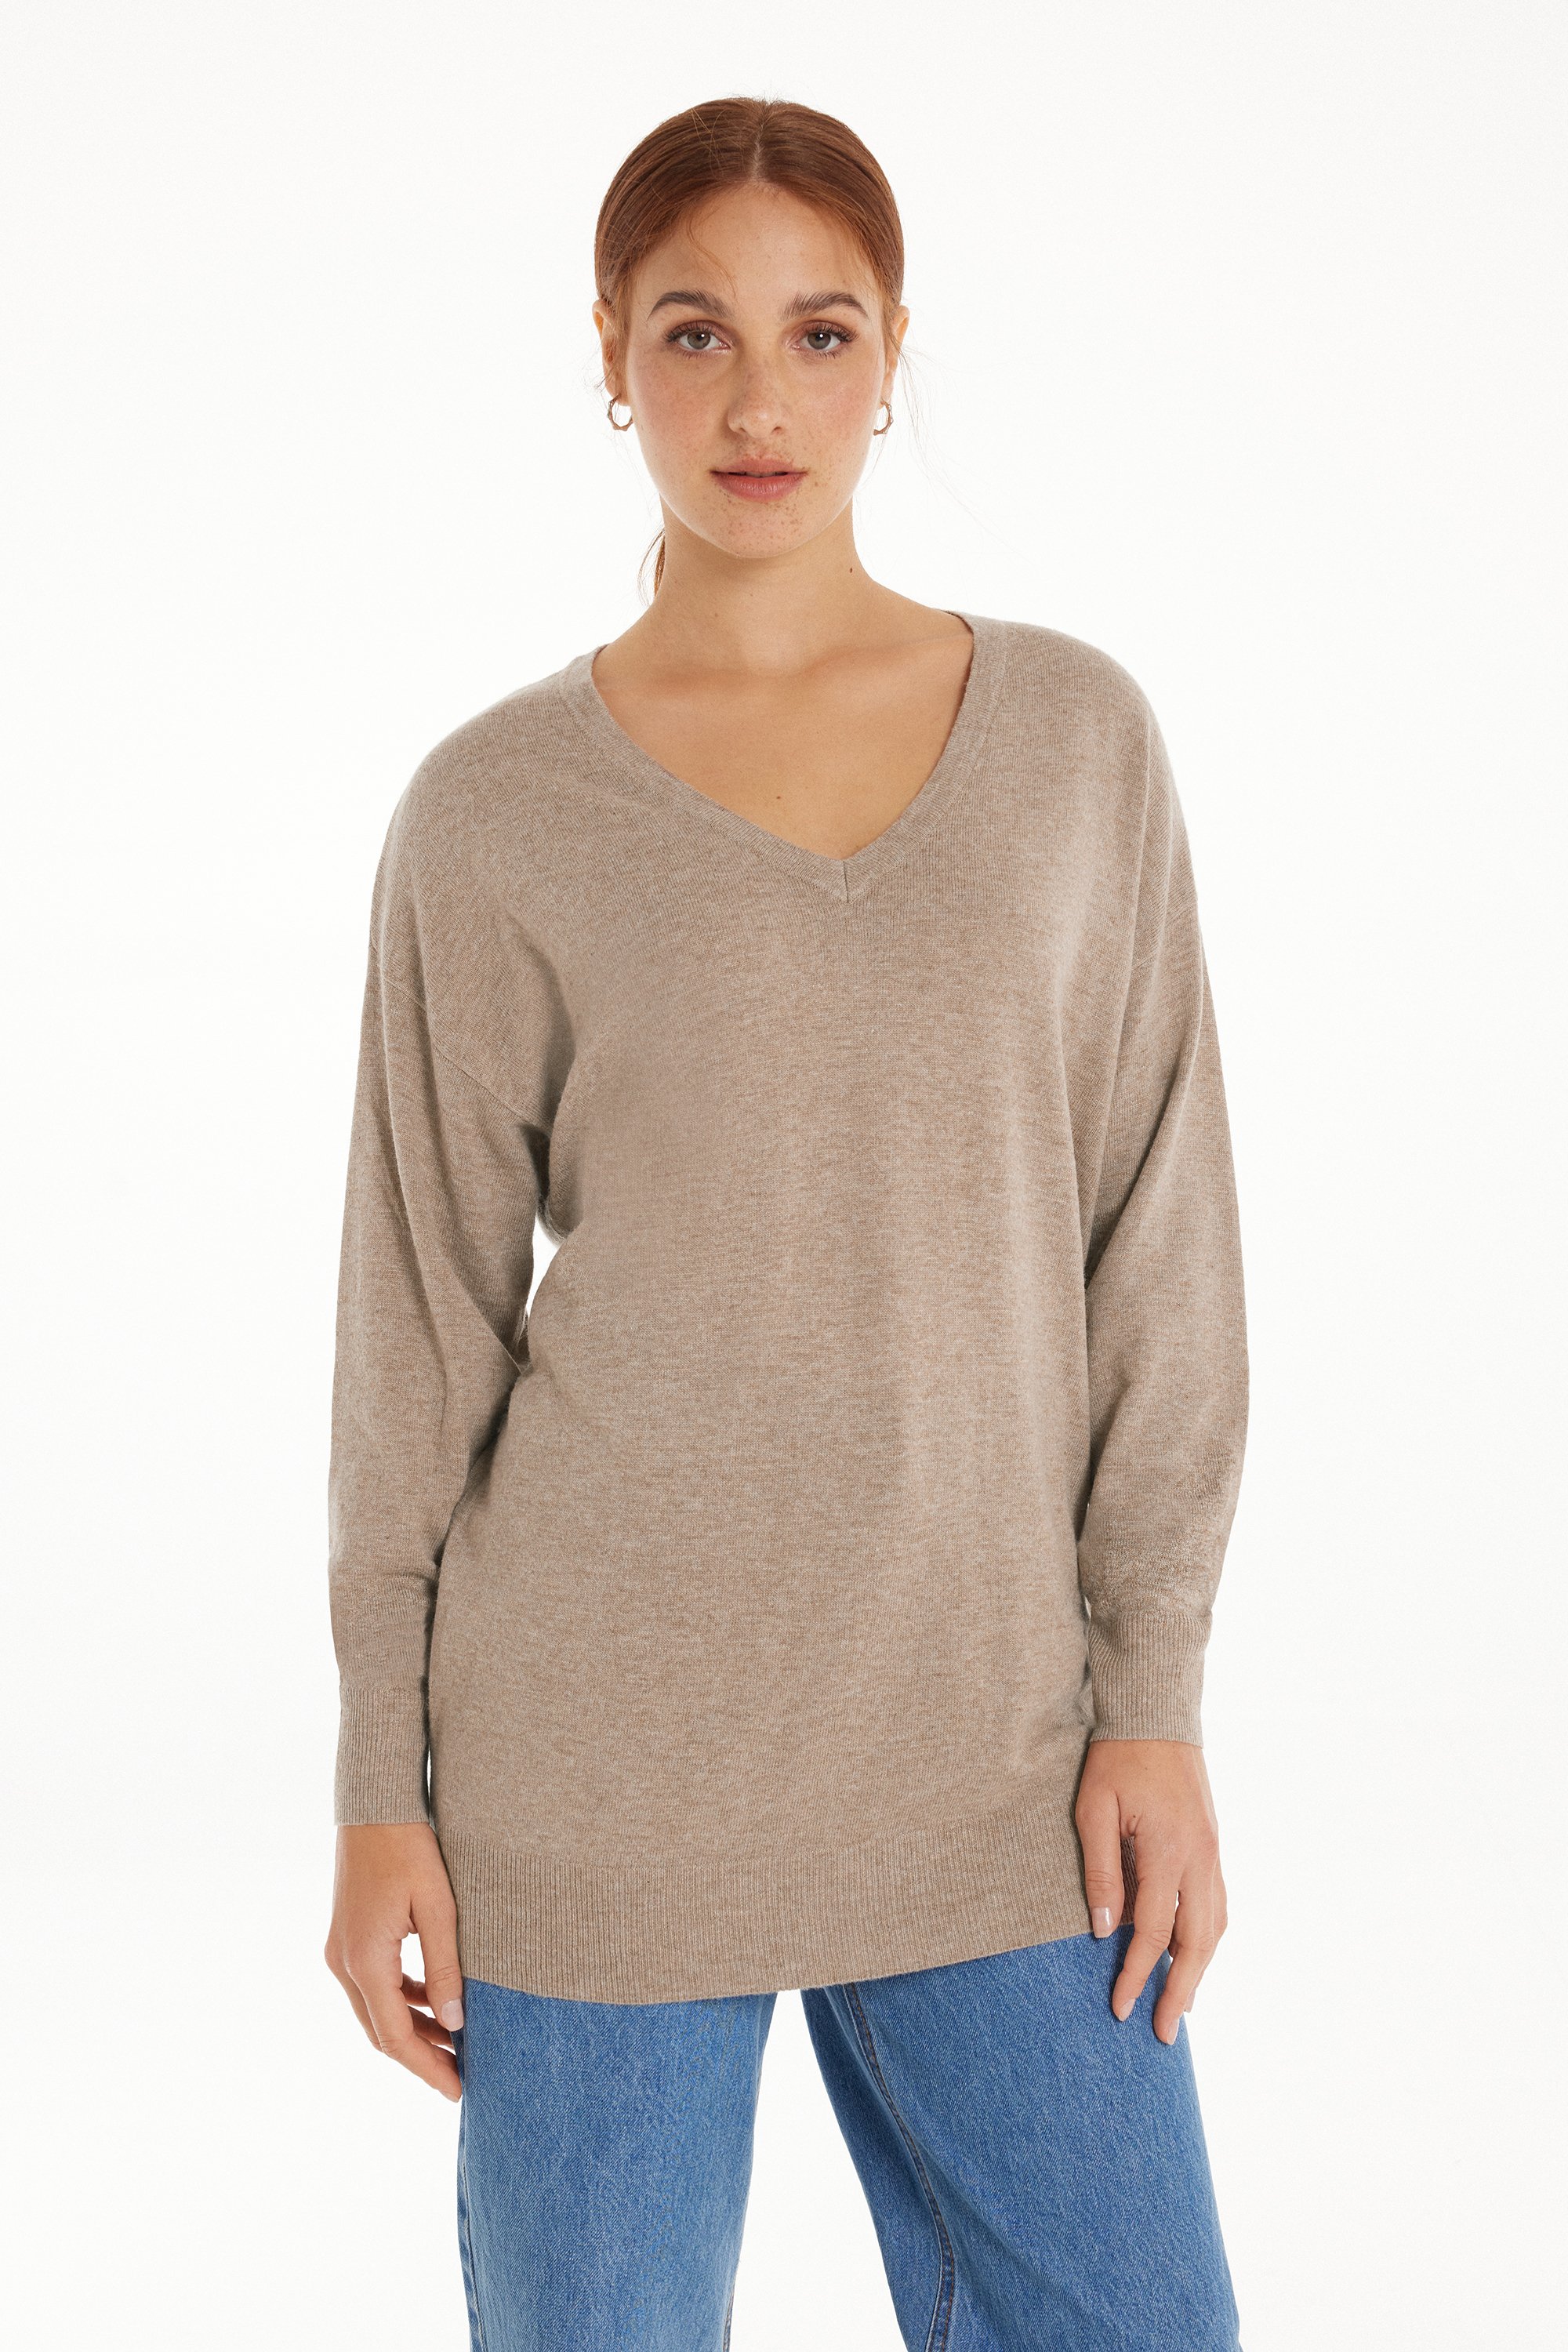 Long-Sleeved V-Neck Heavy Jersey with Wool